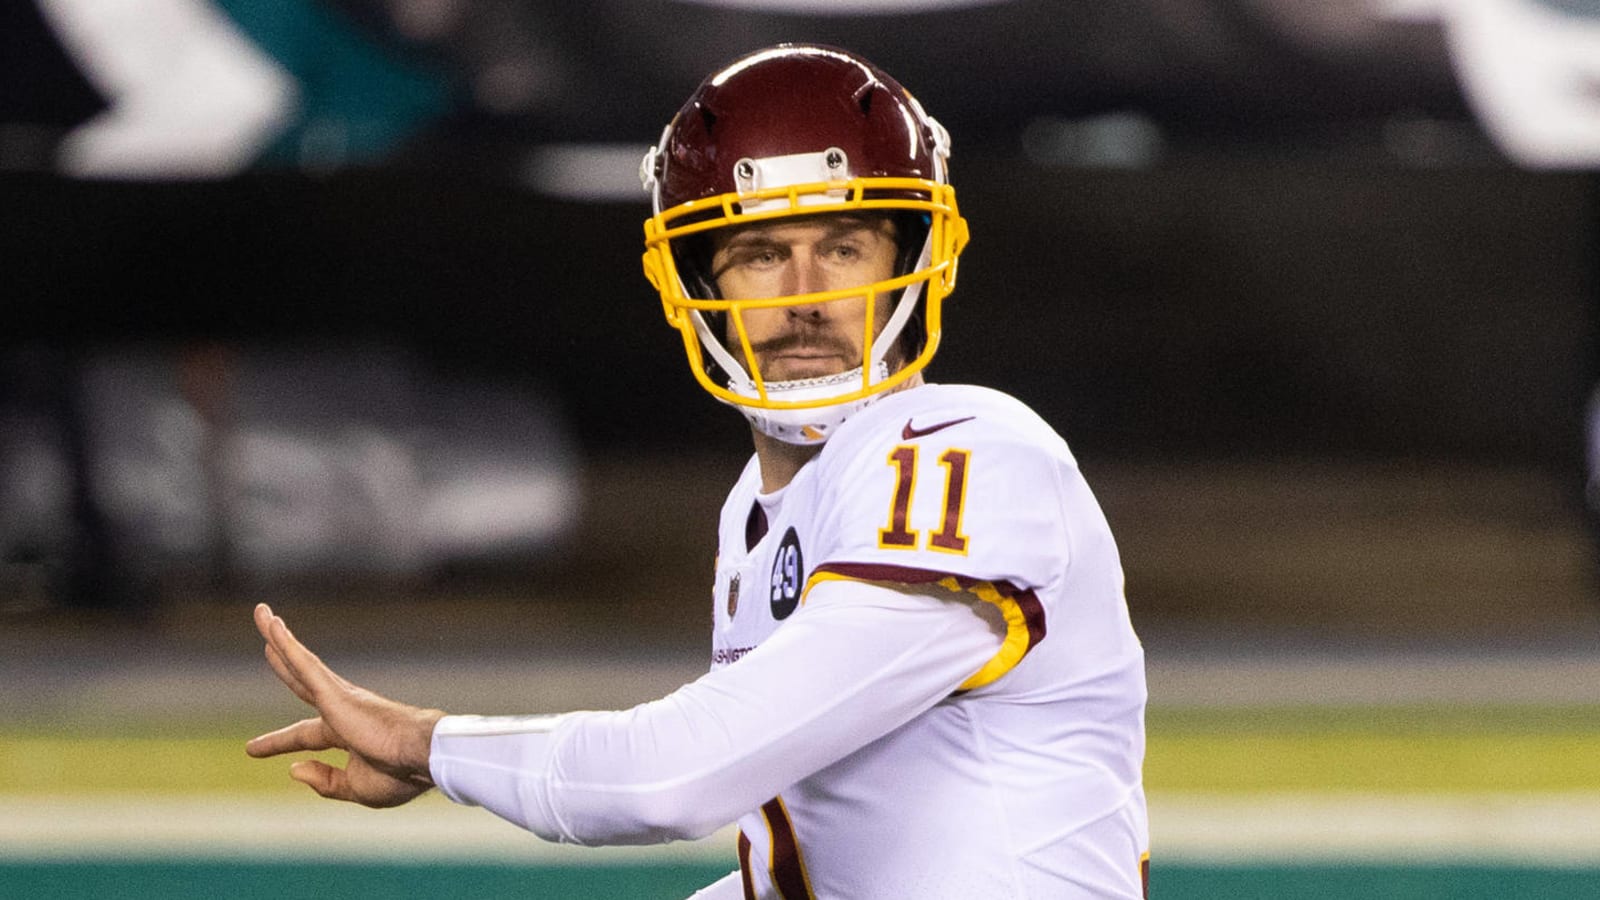 Alex Smith, Mark Sanchez auditioned for CBS analyst roles?